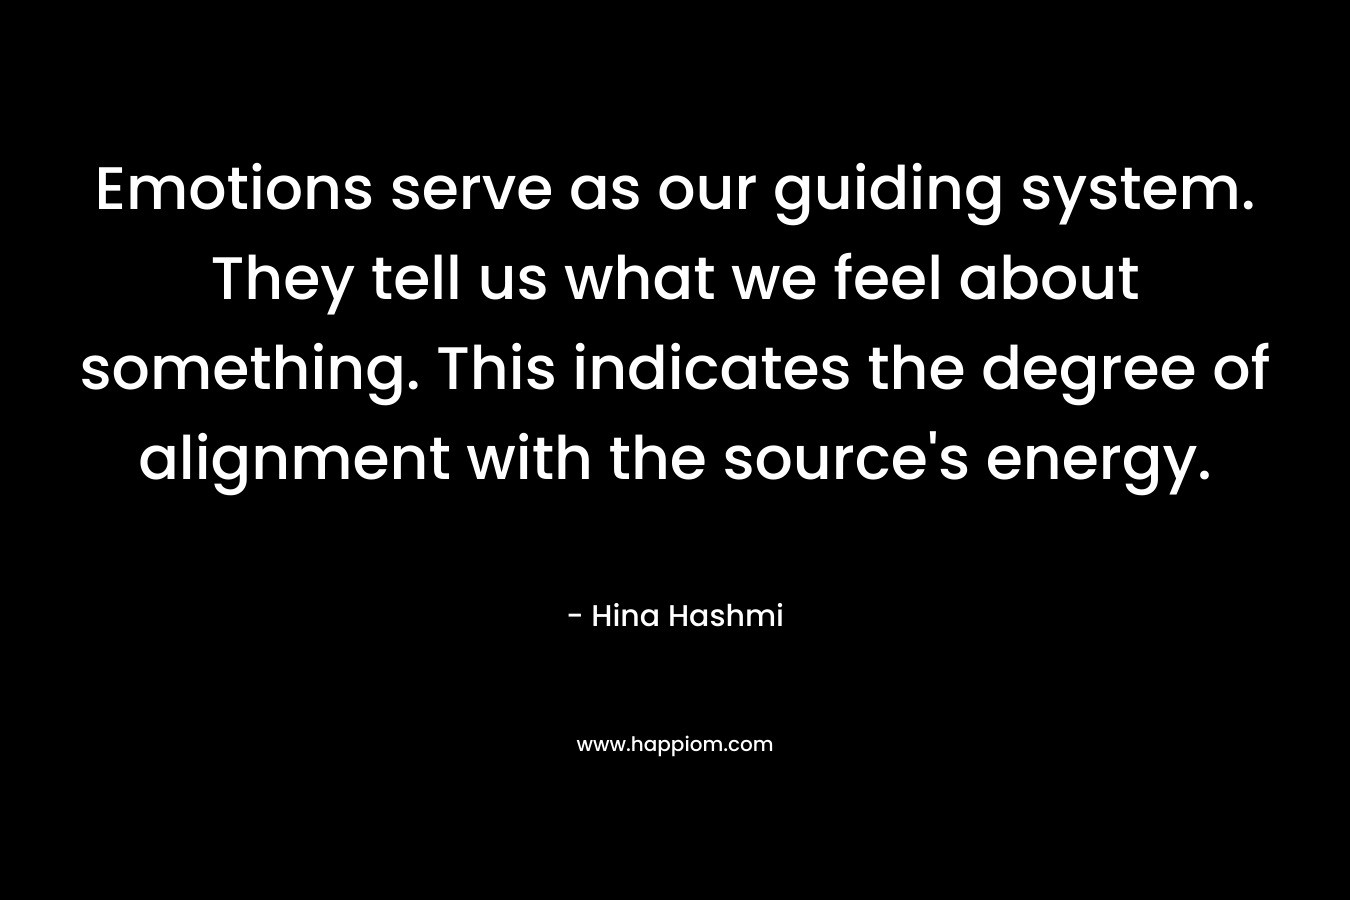 Emotions serve as our guiding system. They tell us what we feel about something. This indicates the degree of alignment with the source's energy.